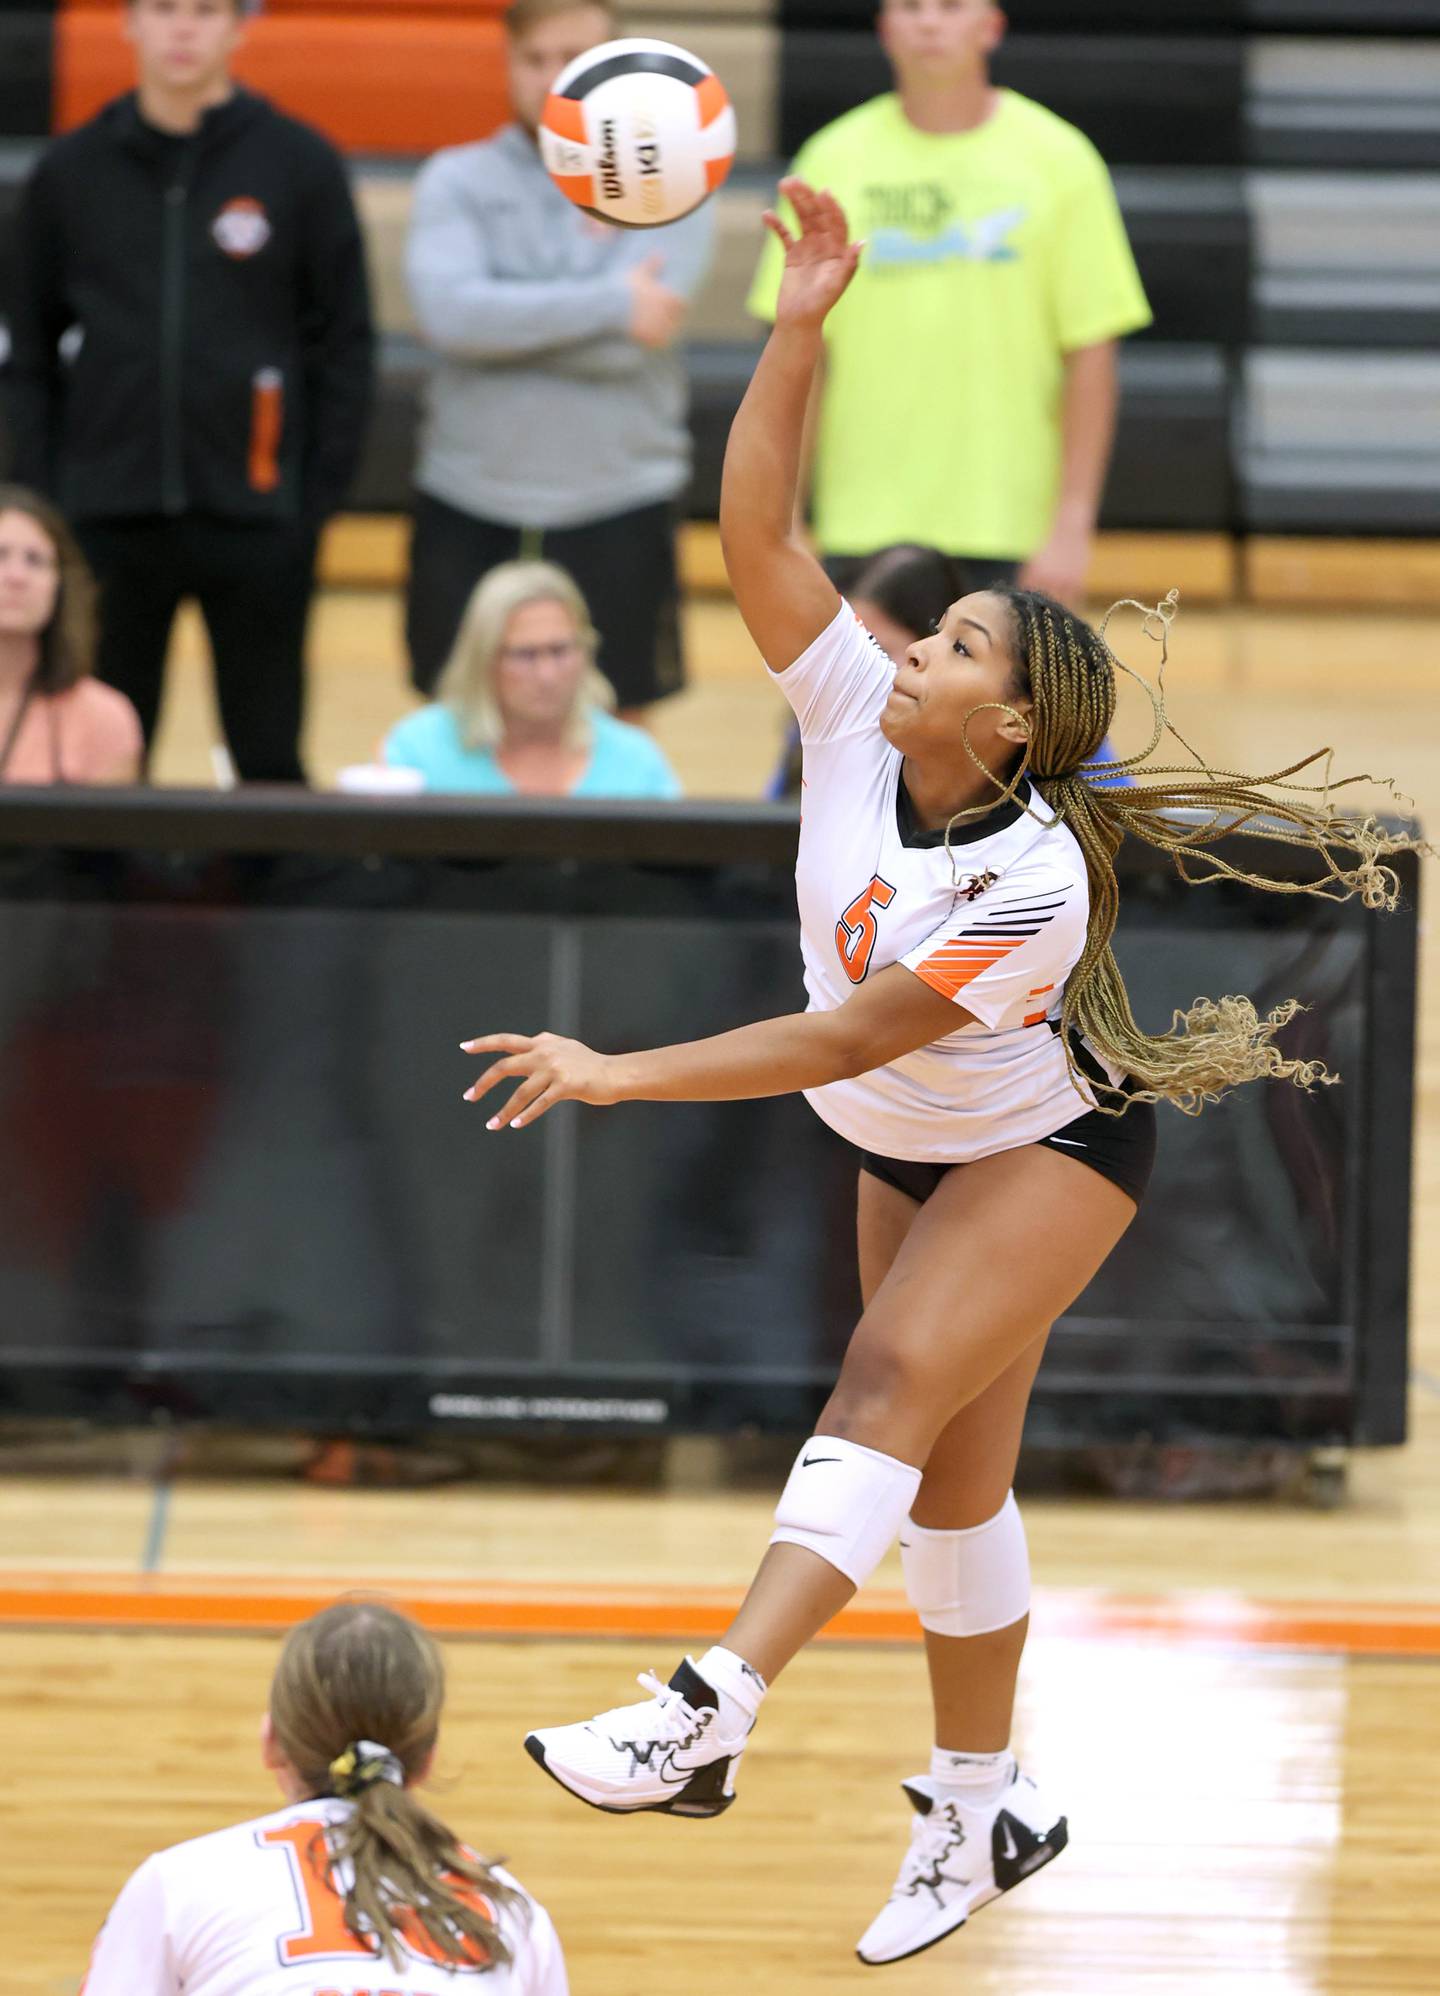 DeKalb's MaKayla Williams hits the ball during their match against Sycamore Wednesday, Aug. 24, 2022, at DeKalb High School.